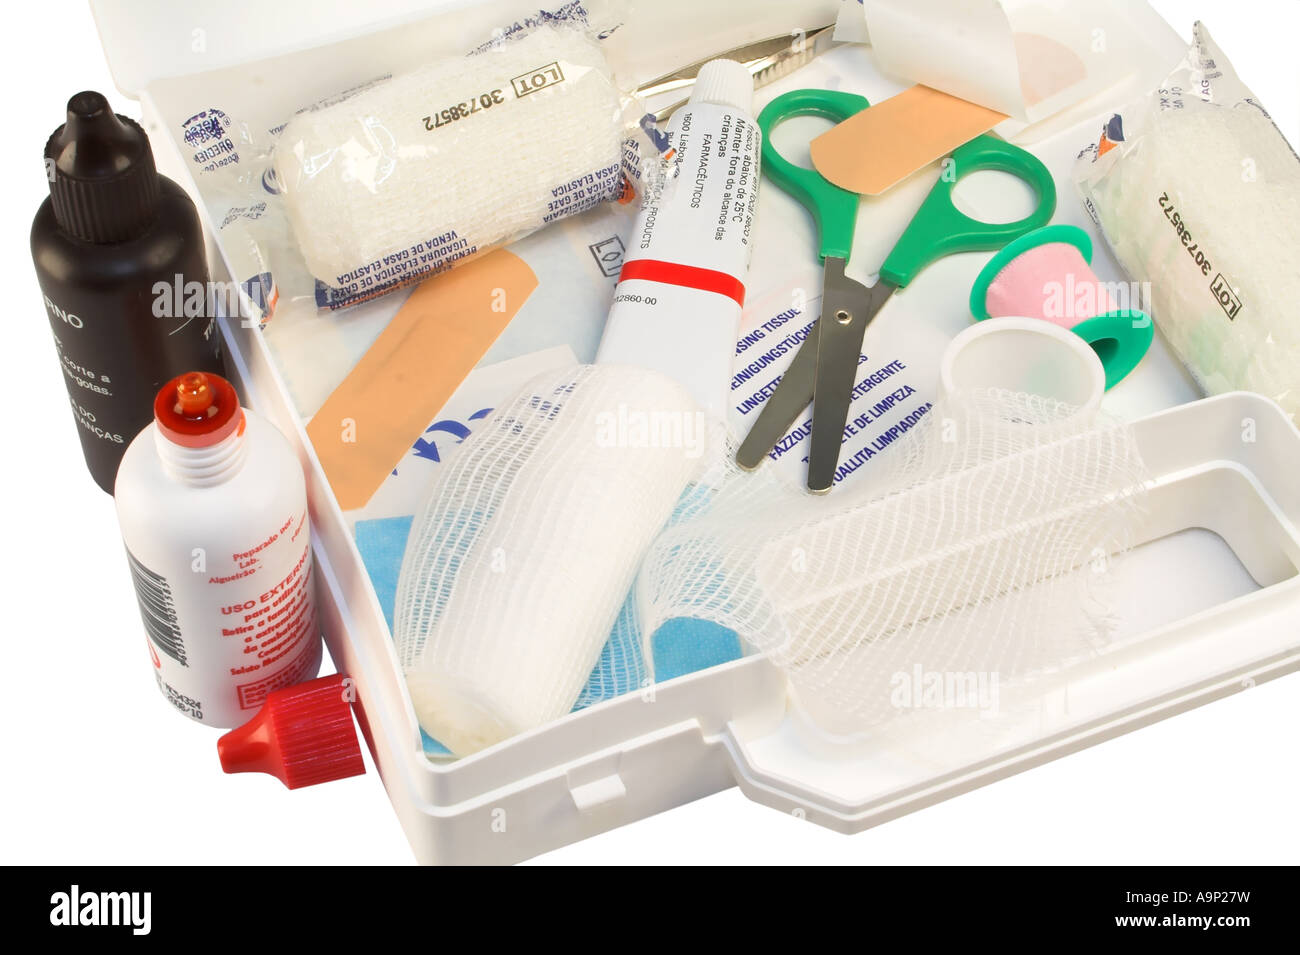 Opened first-aid kit box Stock Photo